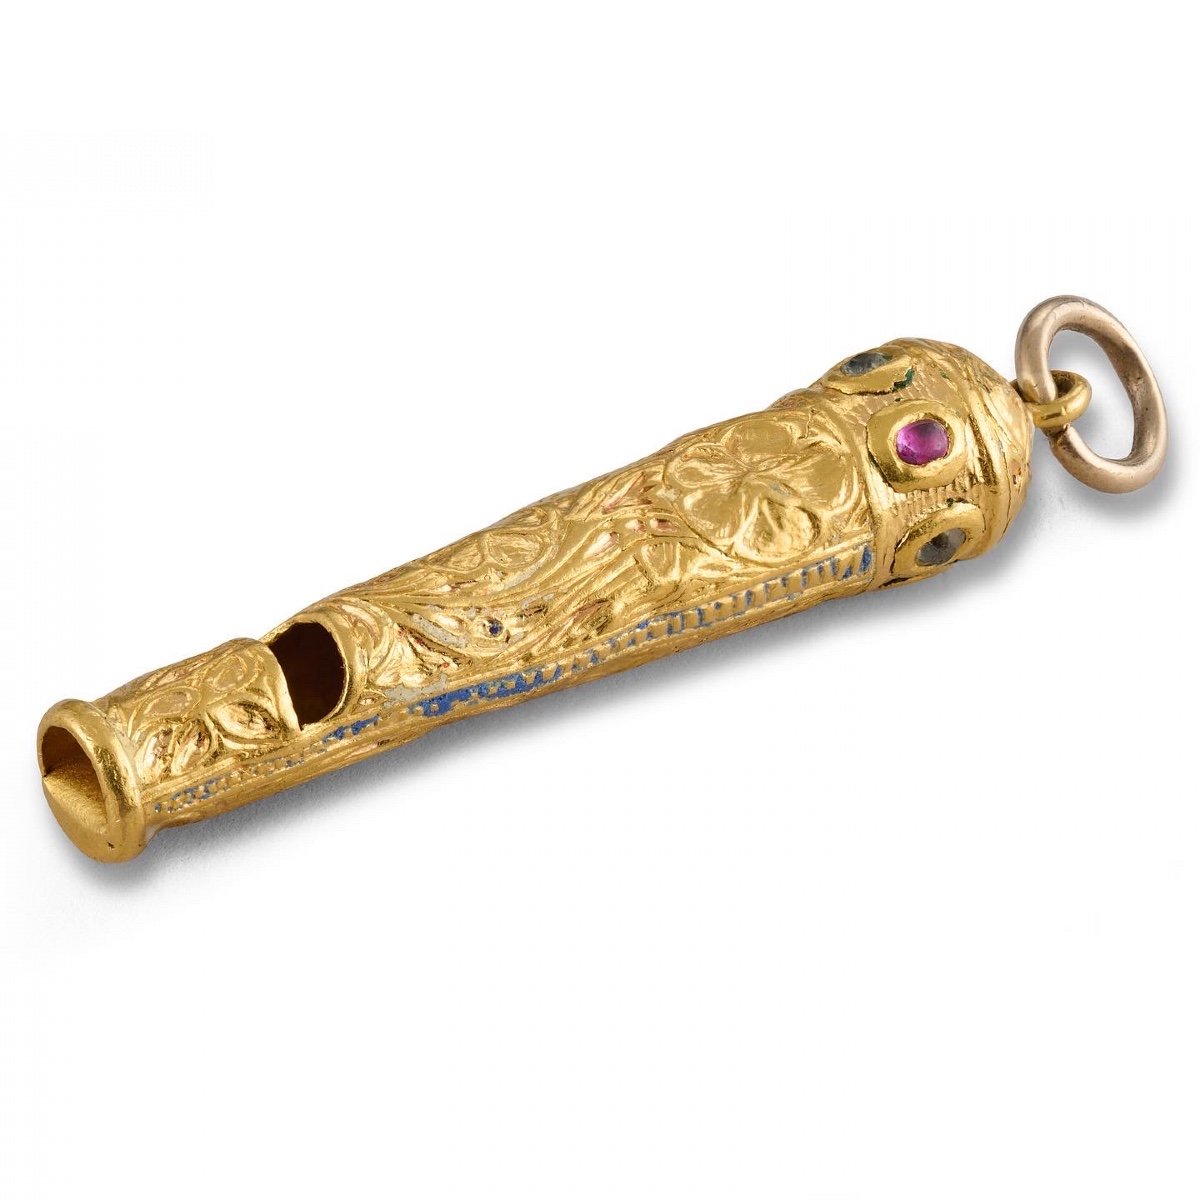 Mughal Gold And Enamel Hawking Whistle. Indian, Late 18th - Early 19th Century.